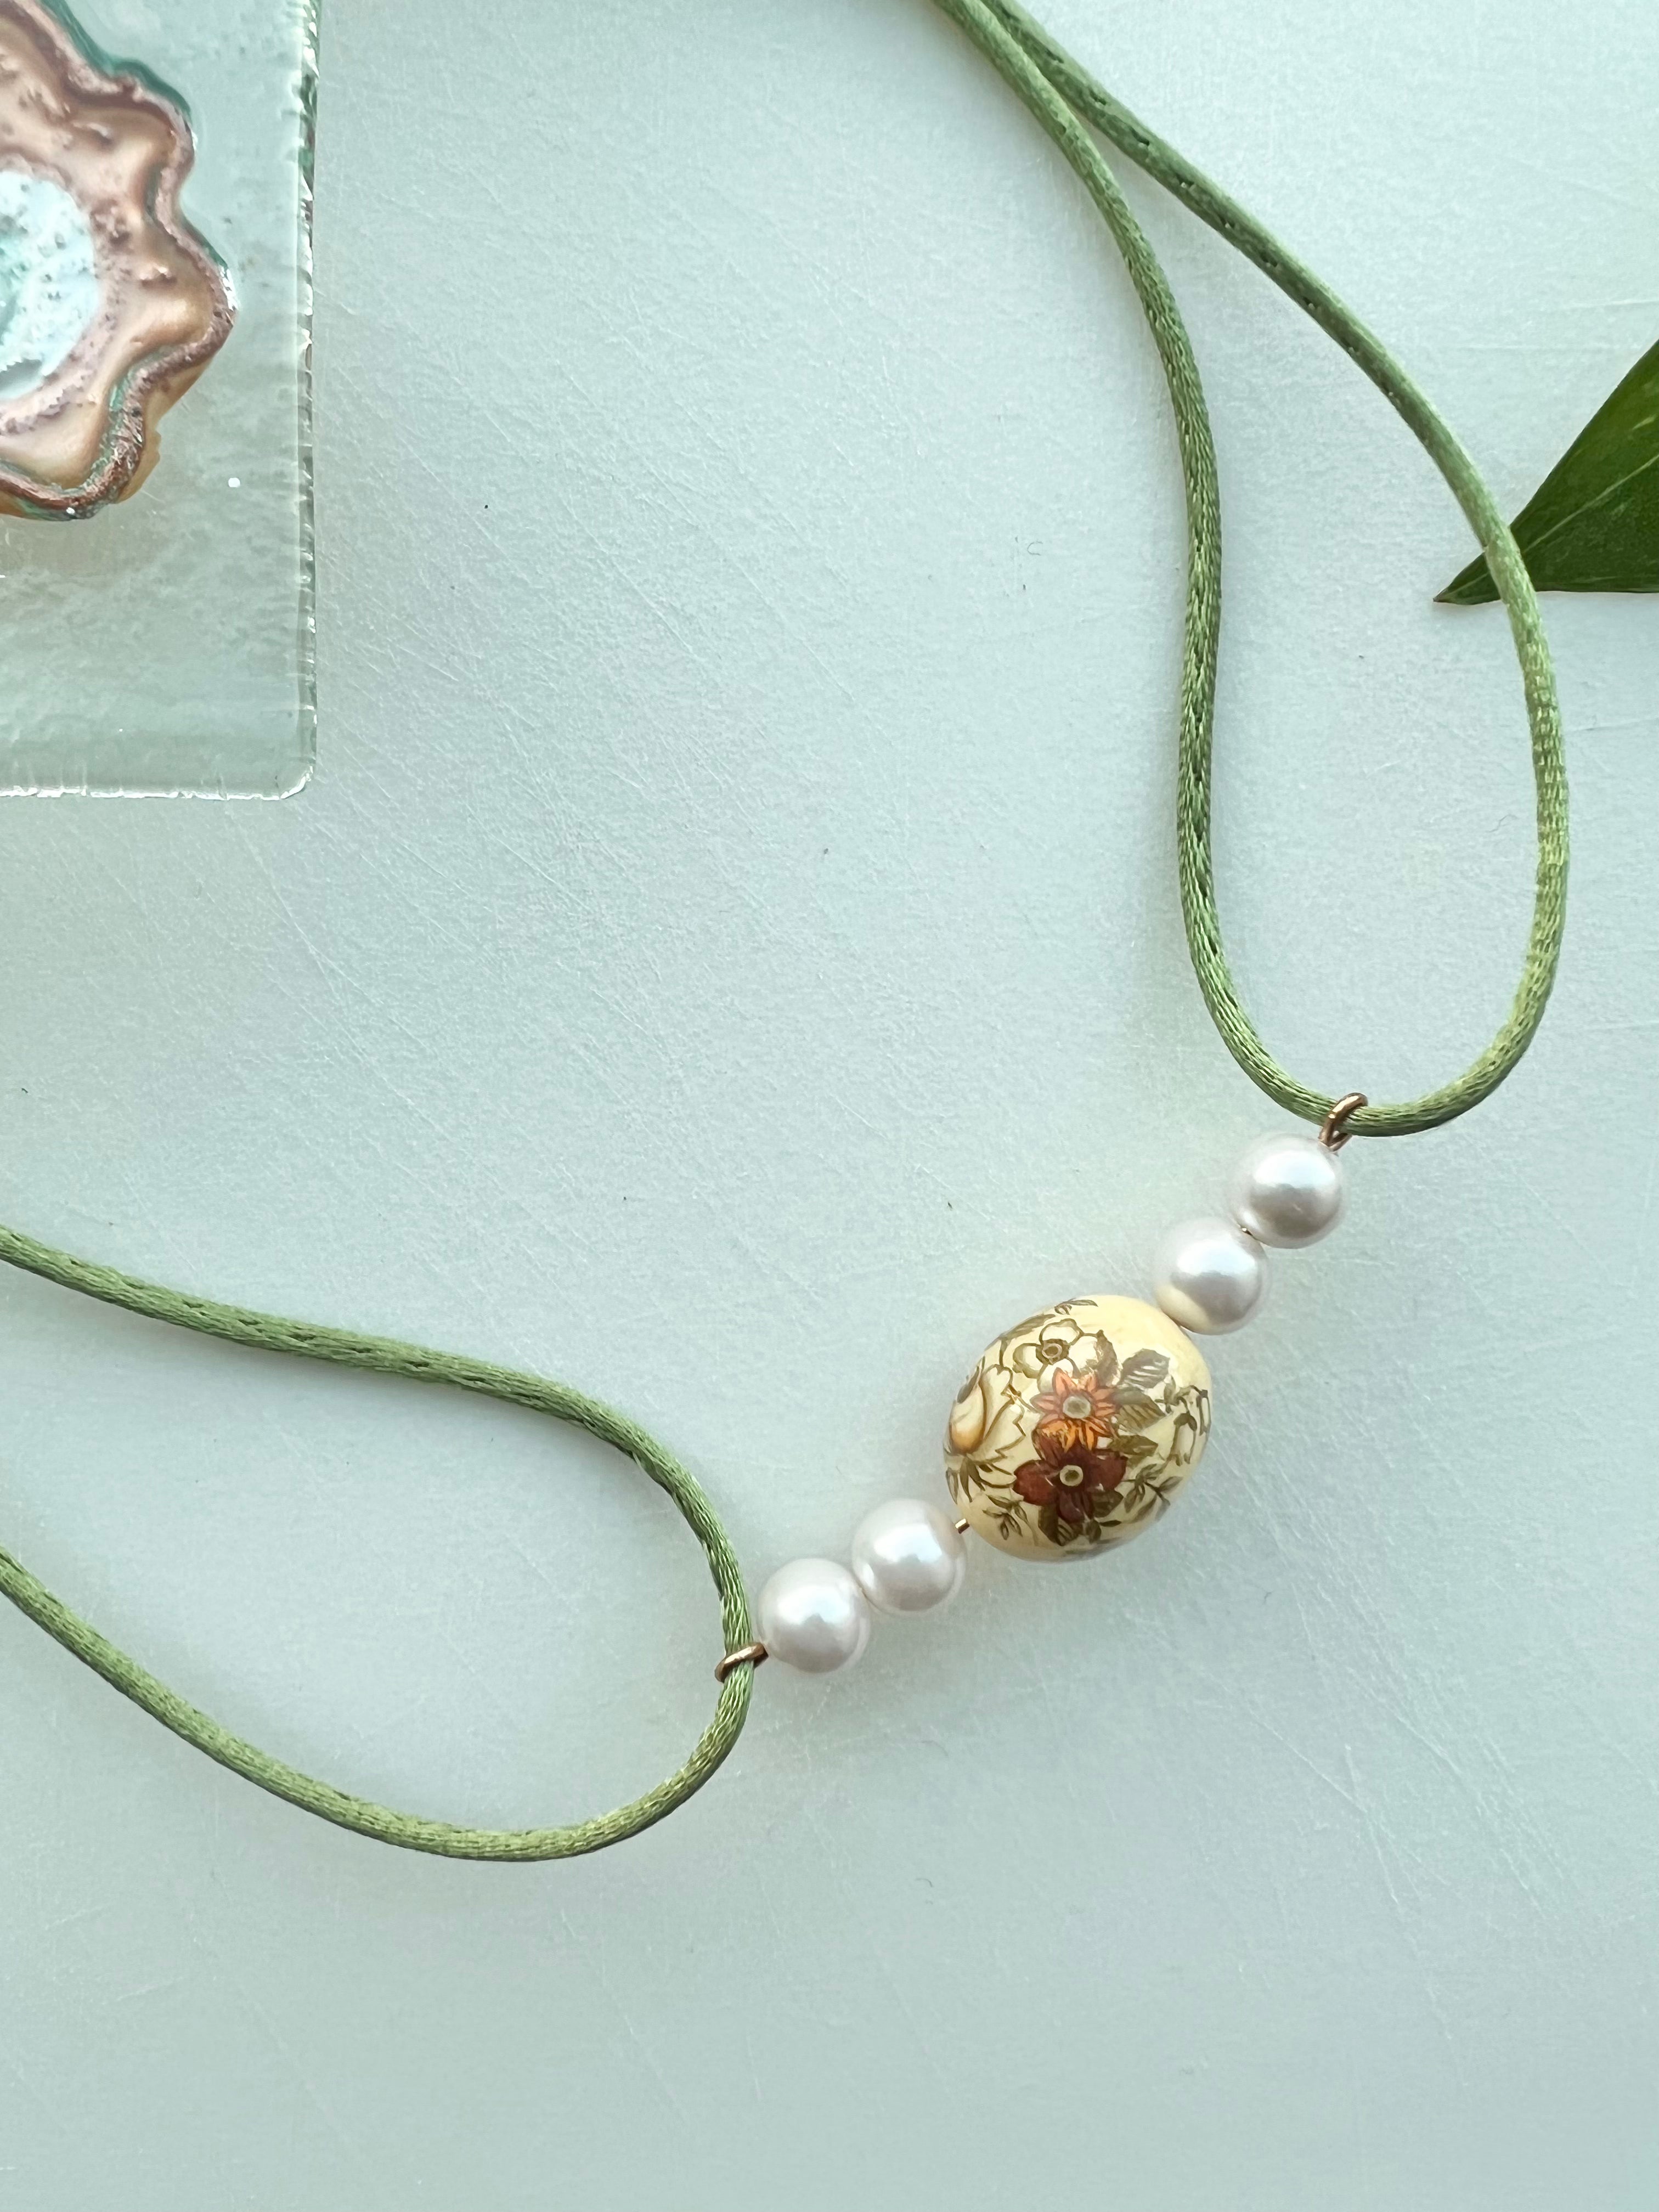 Floral Oval Yellow Cream Bead With Pearl Choker Strung On Charmeuse Green Cord